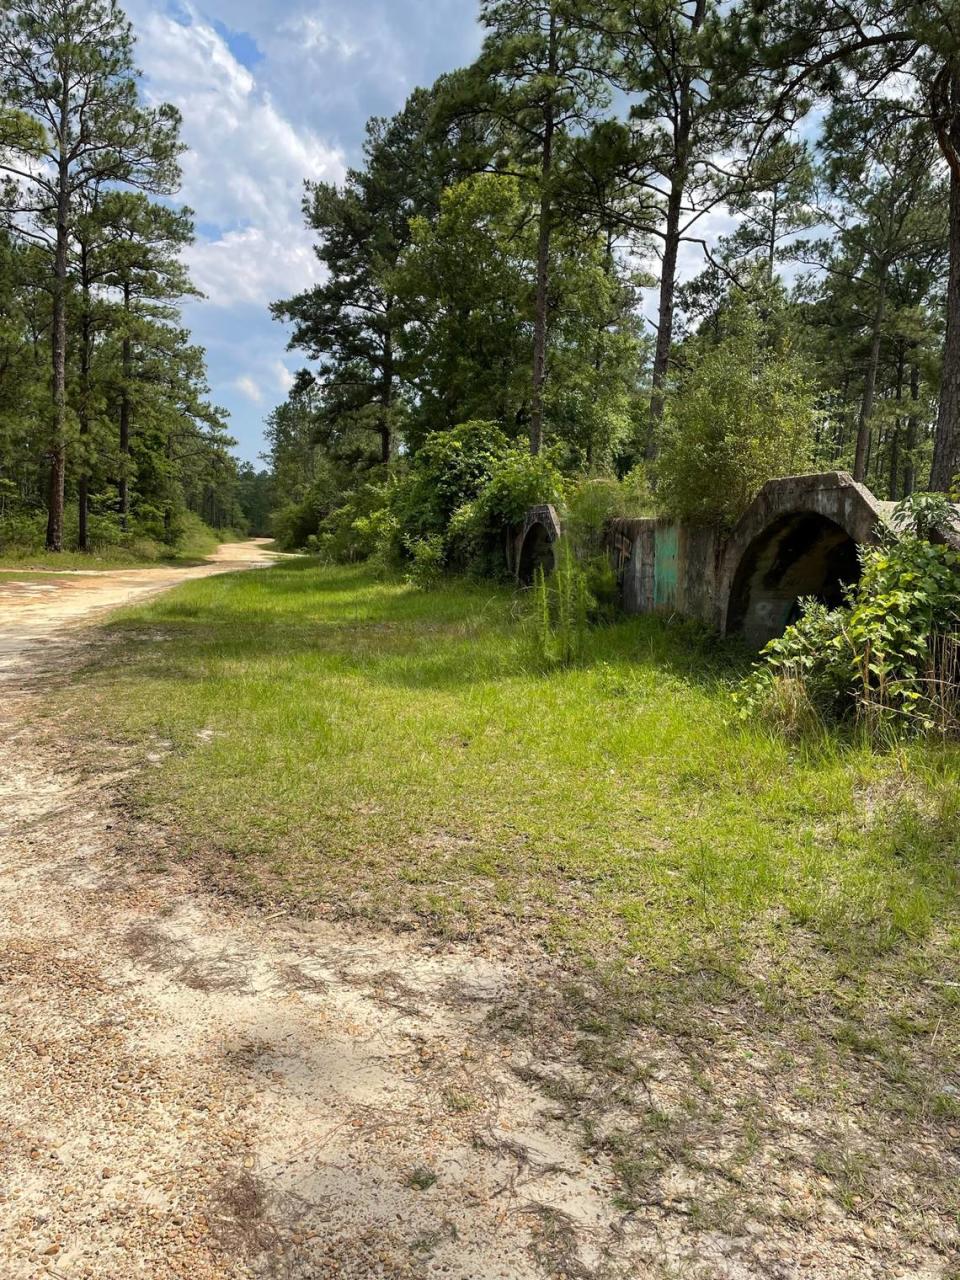 An old ammunition bunker is all that remains of a U.S. Navy base in Saucier that once housed Axis prisoners of war on the Mississippi Coast. The camp inspired the name behind P.O.W. Lake Recreation Area in De Soto National Forest. Allen Frazier.